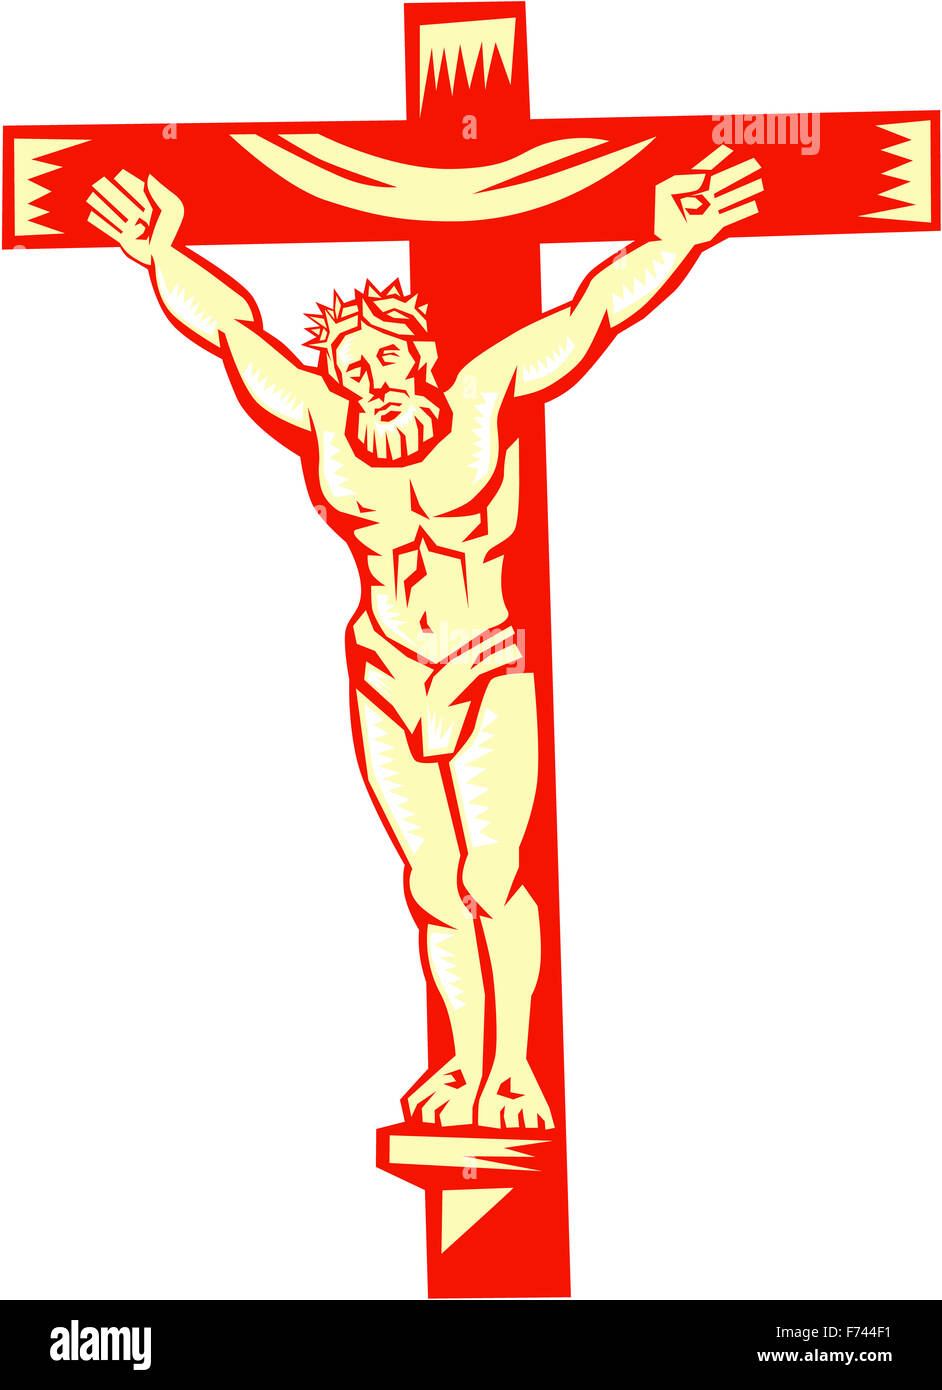 Illustration of Jesus Christ on cross viewed from front set on isolated white background done in retro woodcut style. Stock Photo